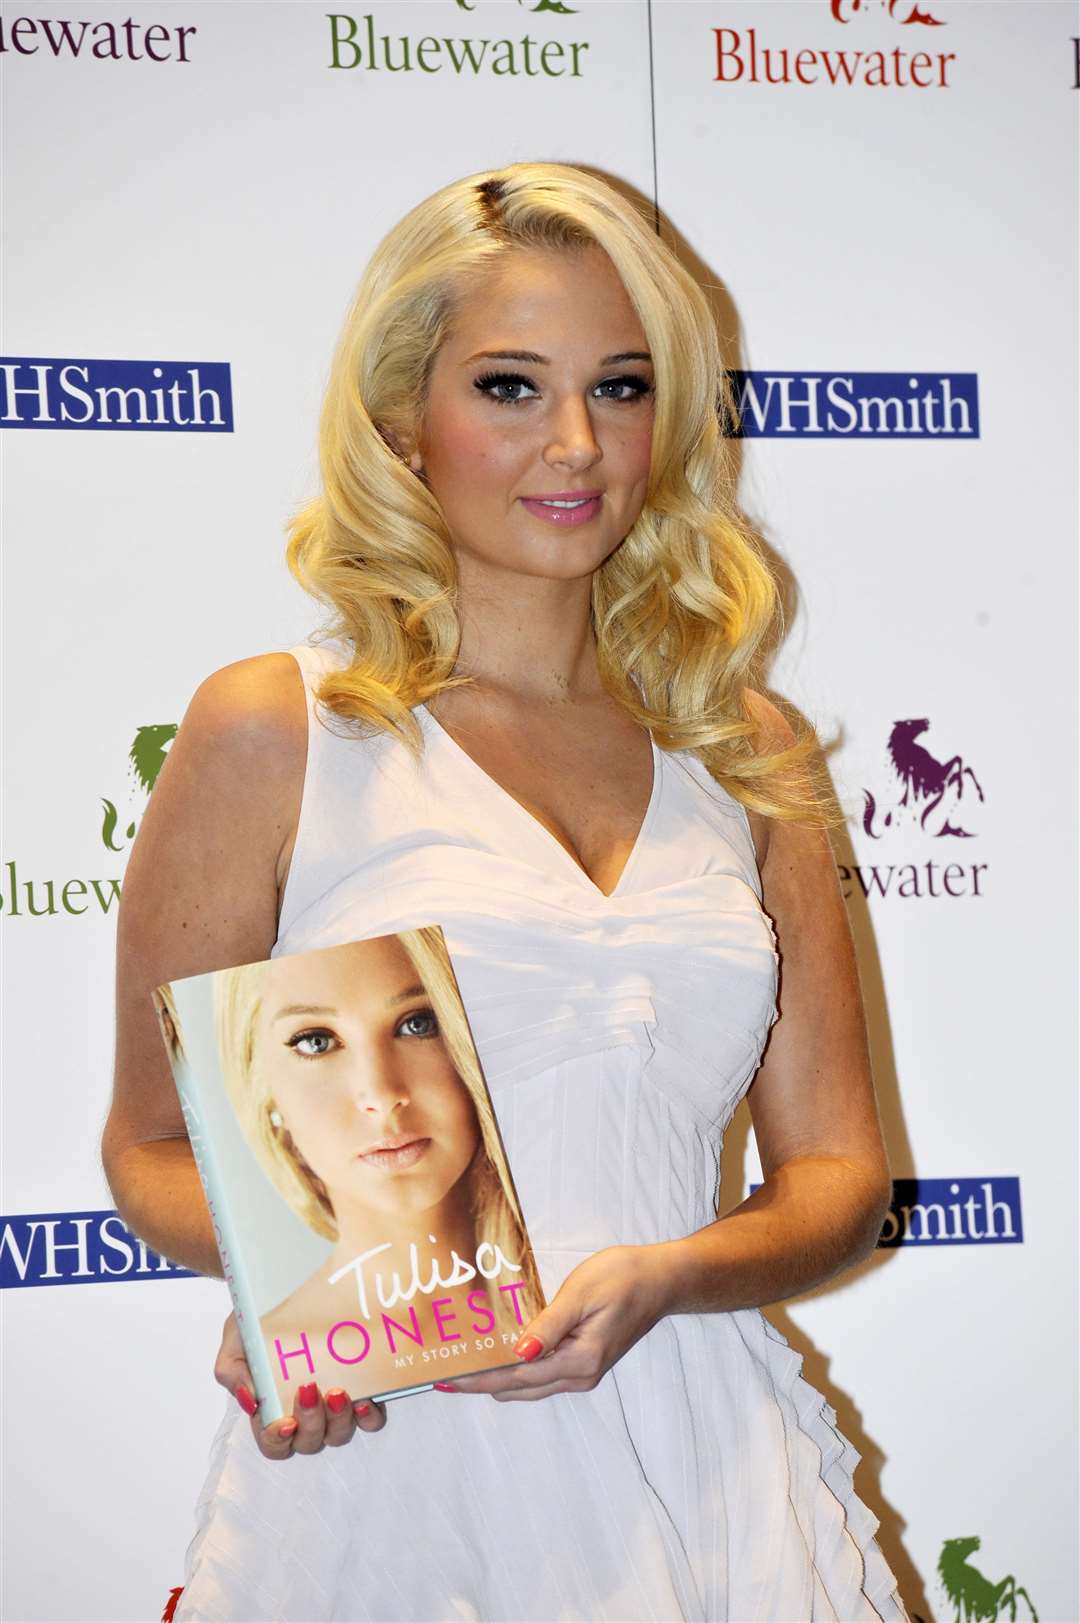 Tulisa Contostavlos met hoards of fans at Bluewater. Picture: Nick Johnson